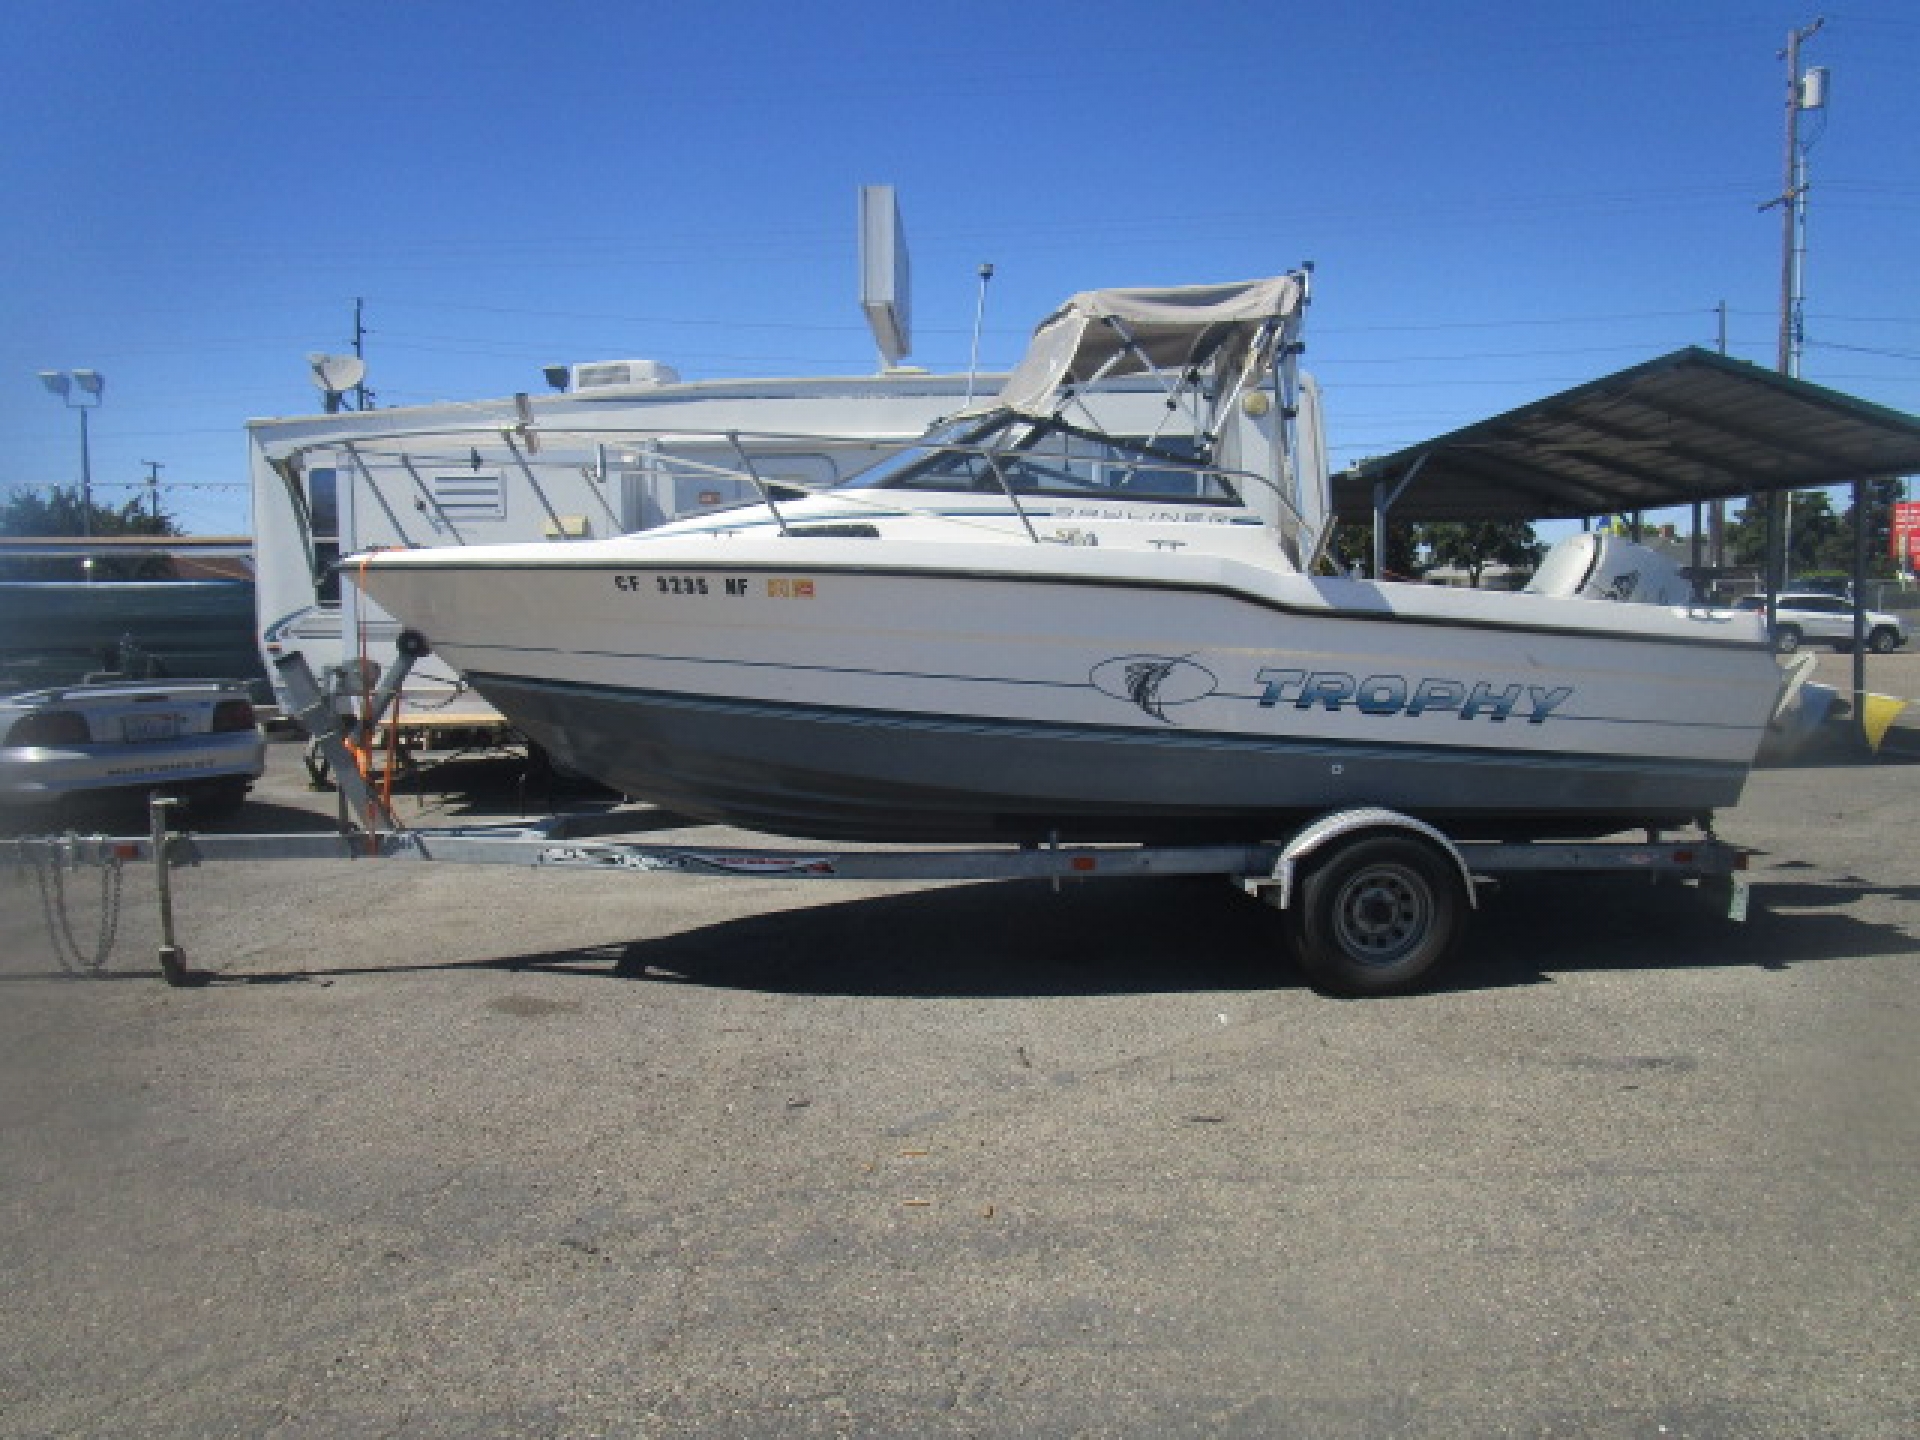 Boat for sale: 1991 Bayliner Fishing Boat Trophy Cuddy Cabin 20' in Lodi  Stockton CA - Lodi Park and Sell